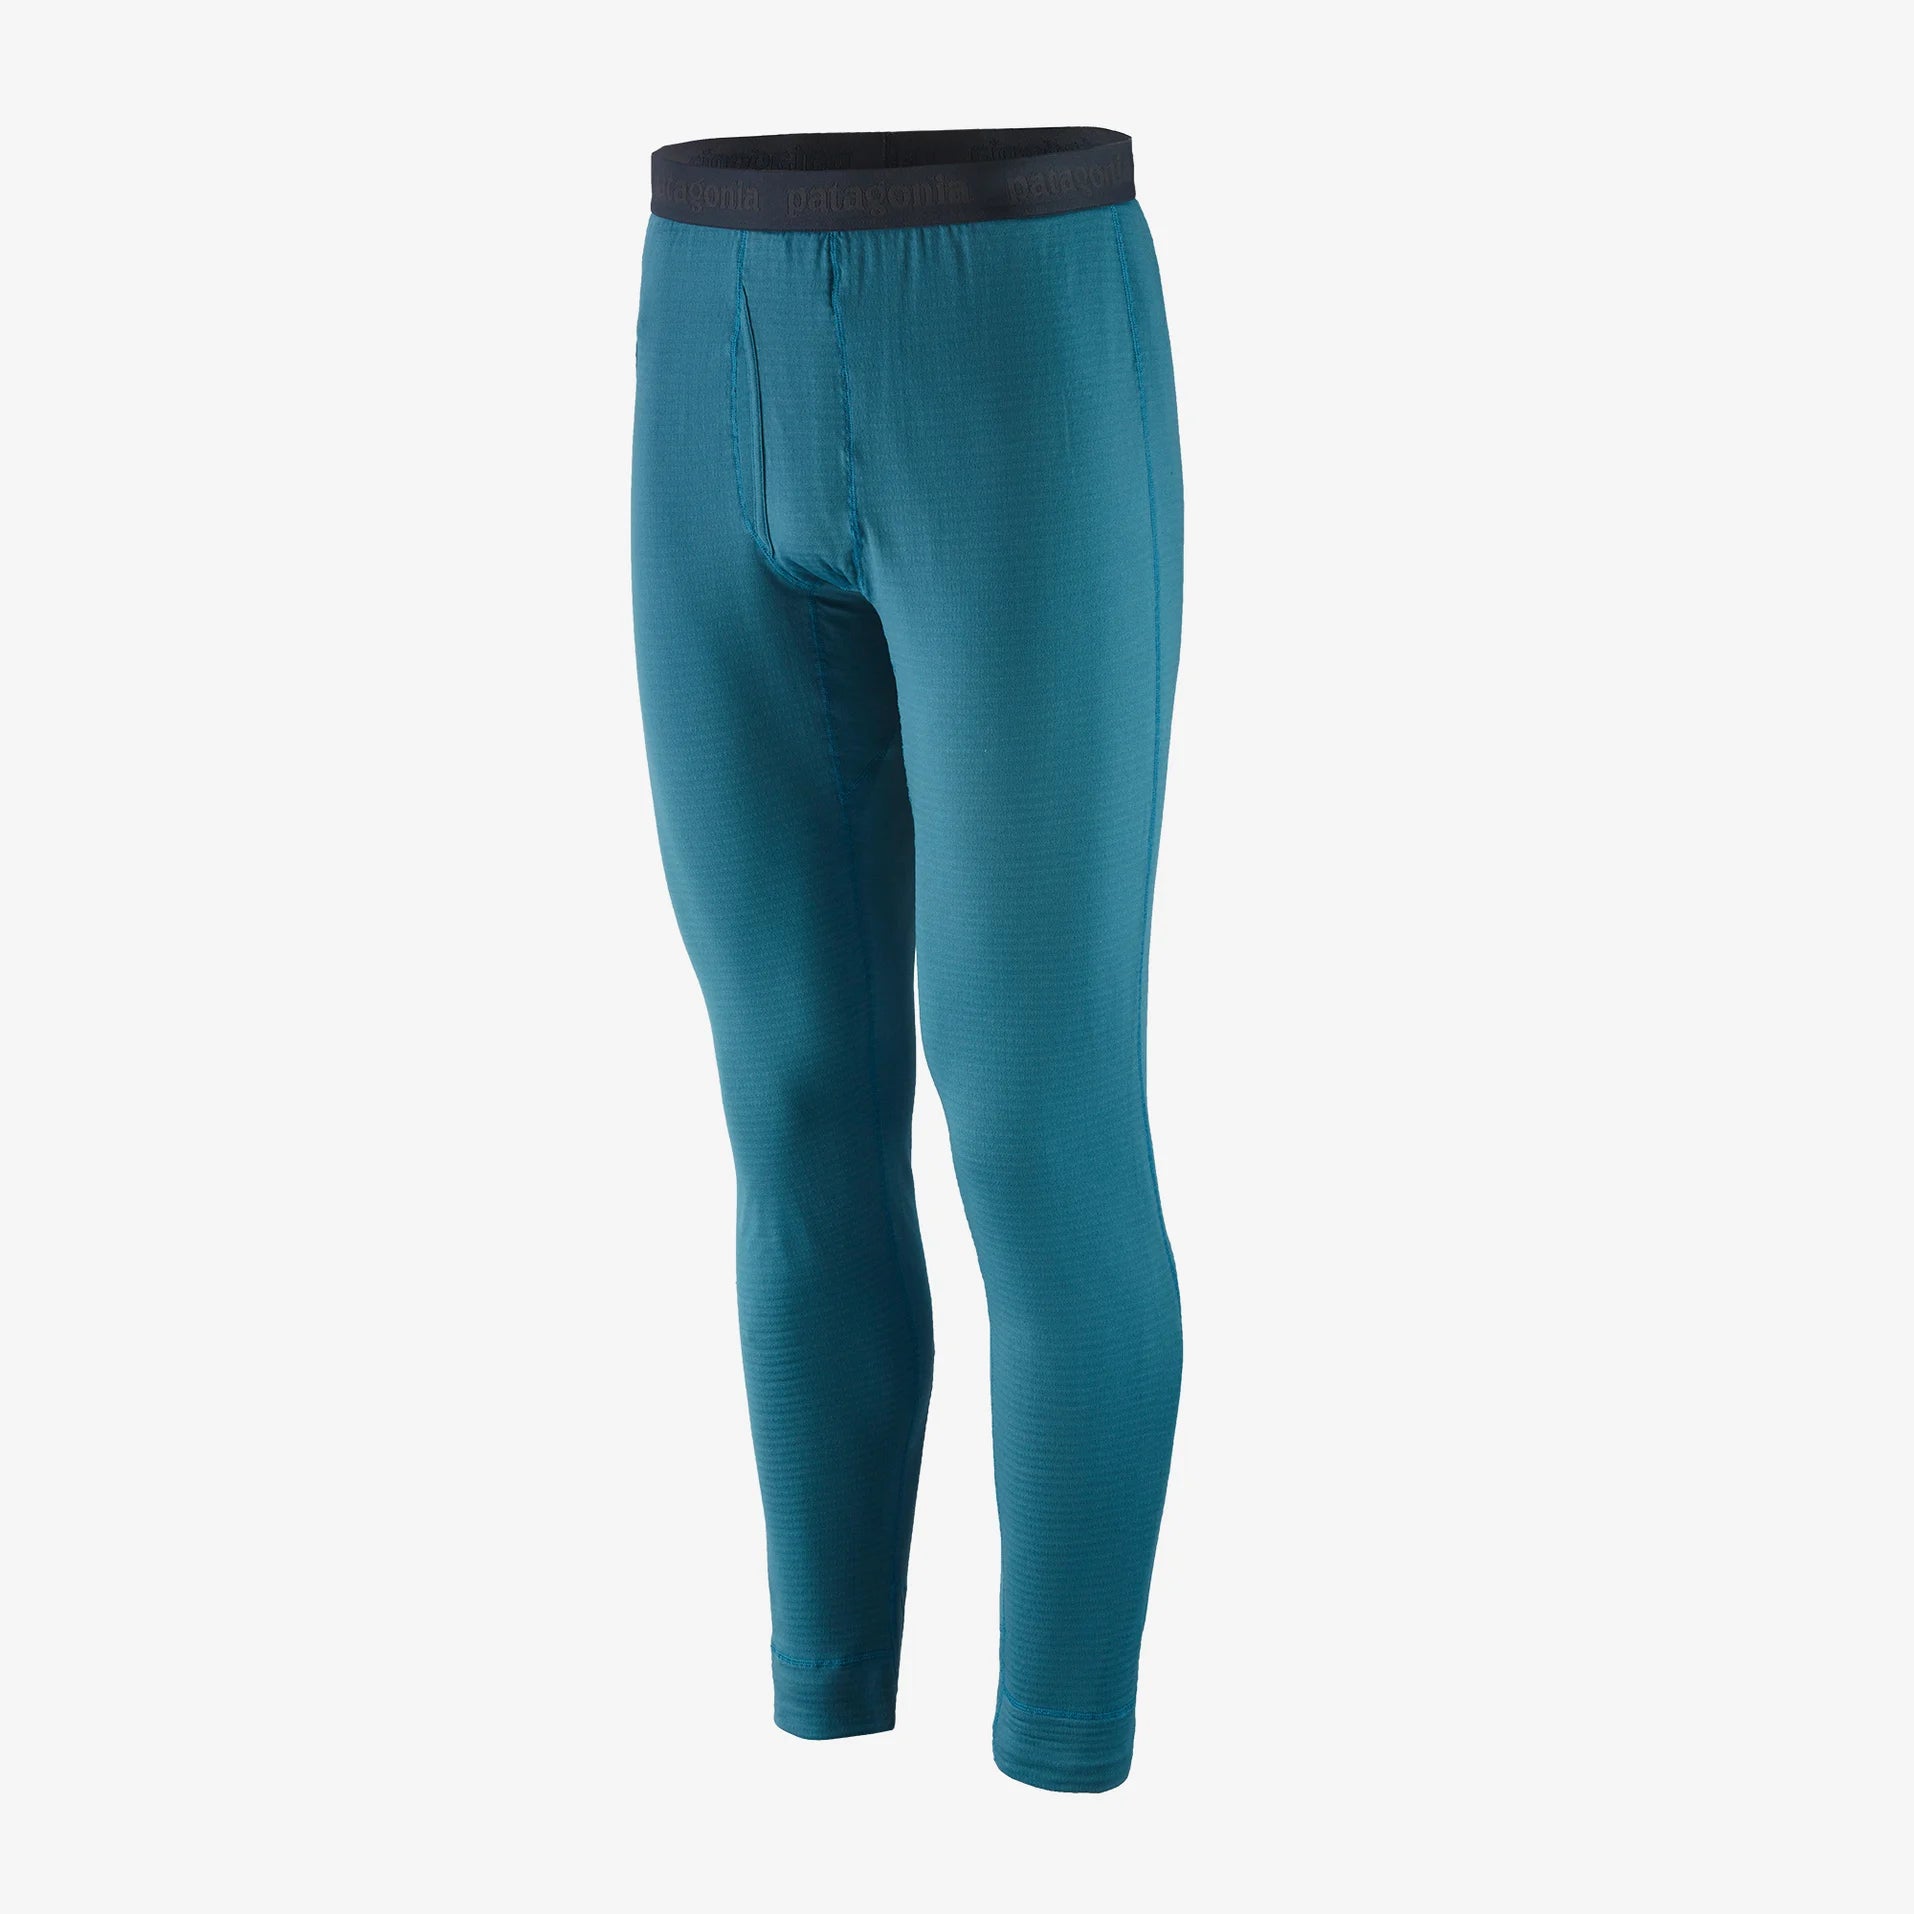 Patagonia Capilene Thermal Weight Bottoms - Women's Review